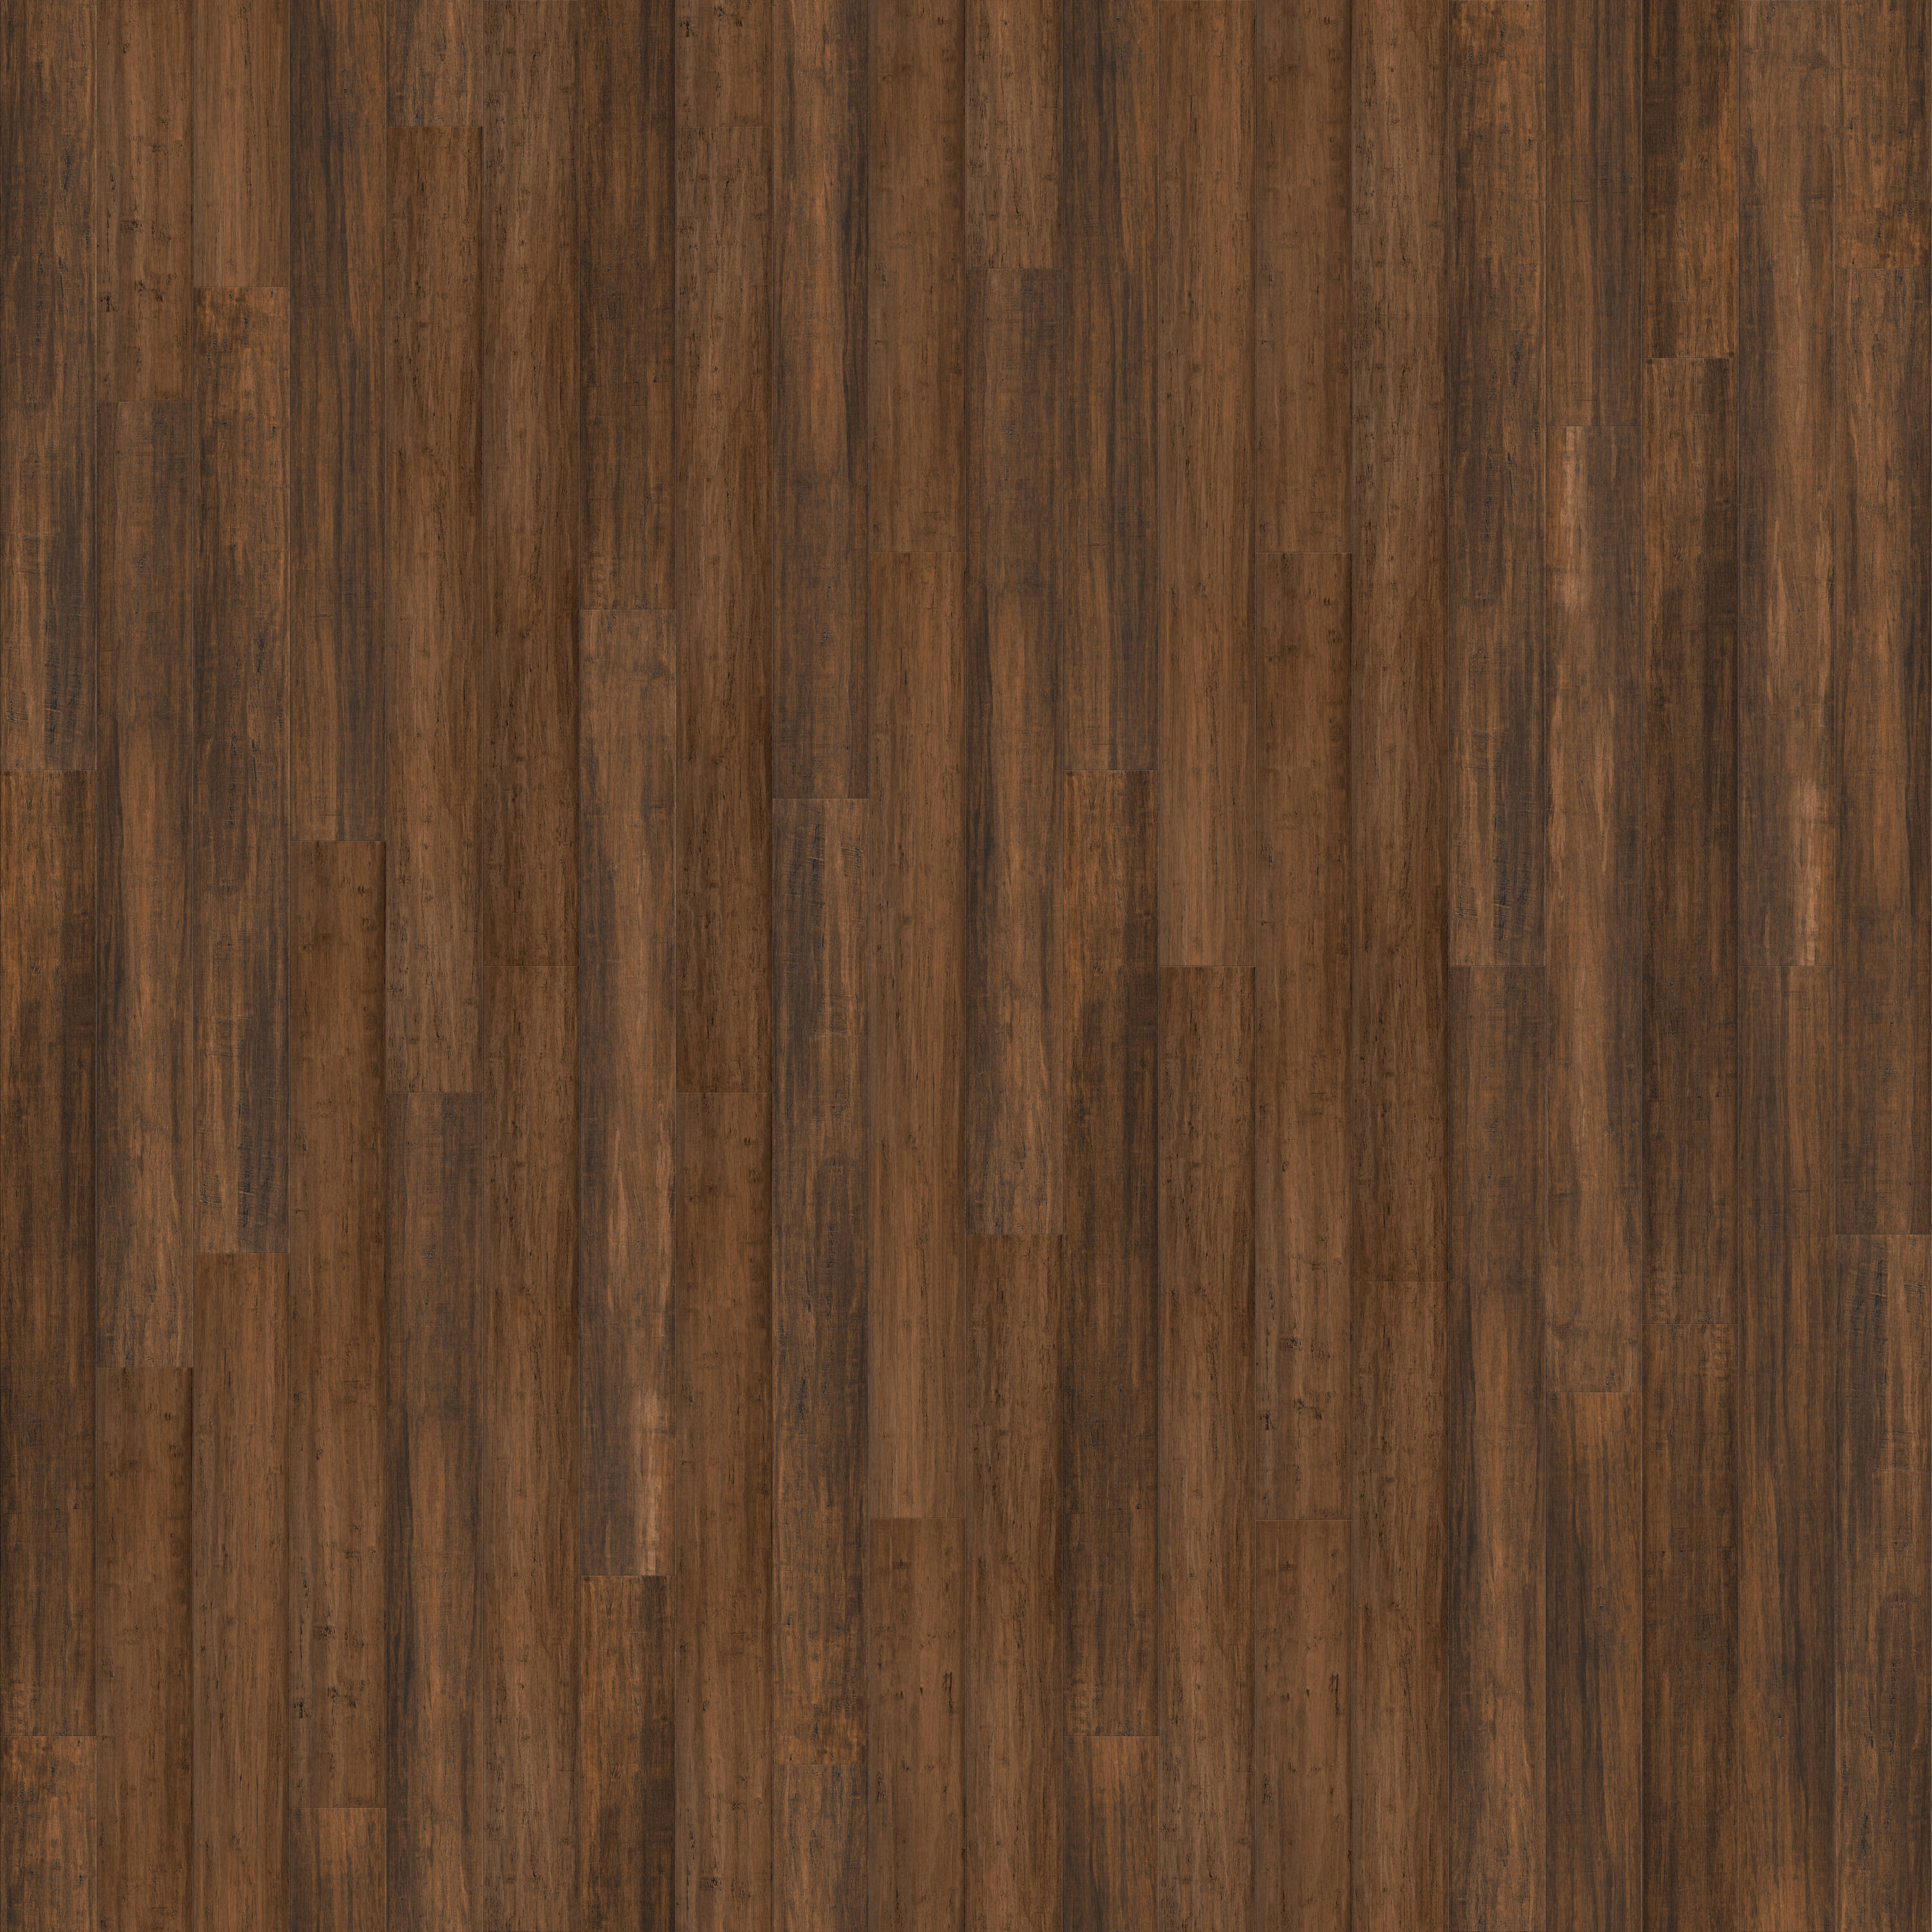 Fossilized Bourbon Barrel Bamboo 5-1/8-in W x 9/16-in T x Distressed Solid Hardwood Flooring (25.6-sq ft) in Brown | - CALI 7003005000